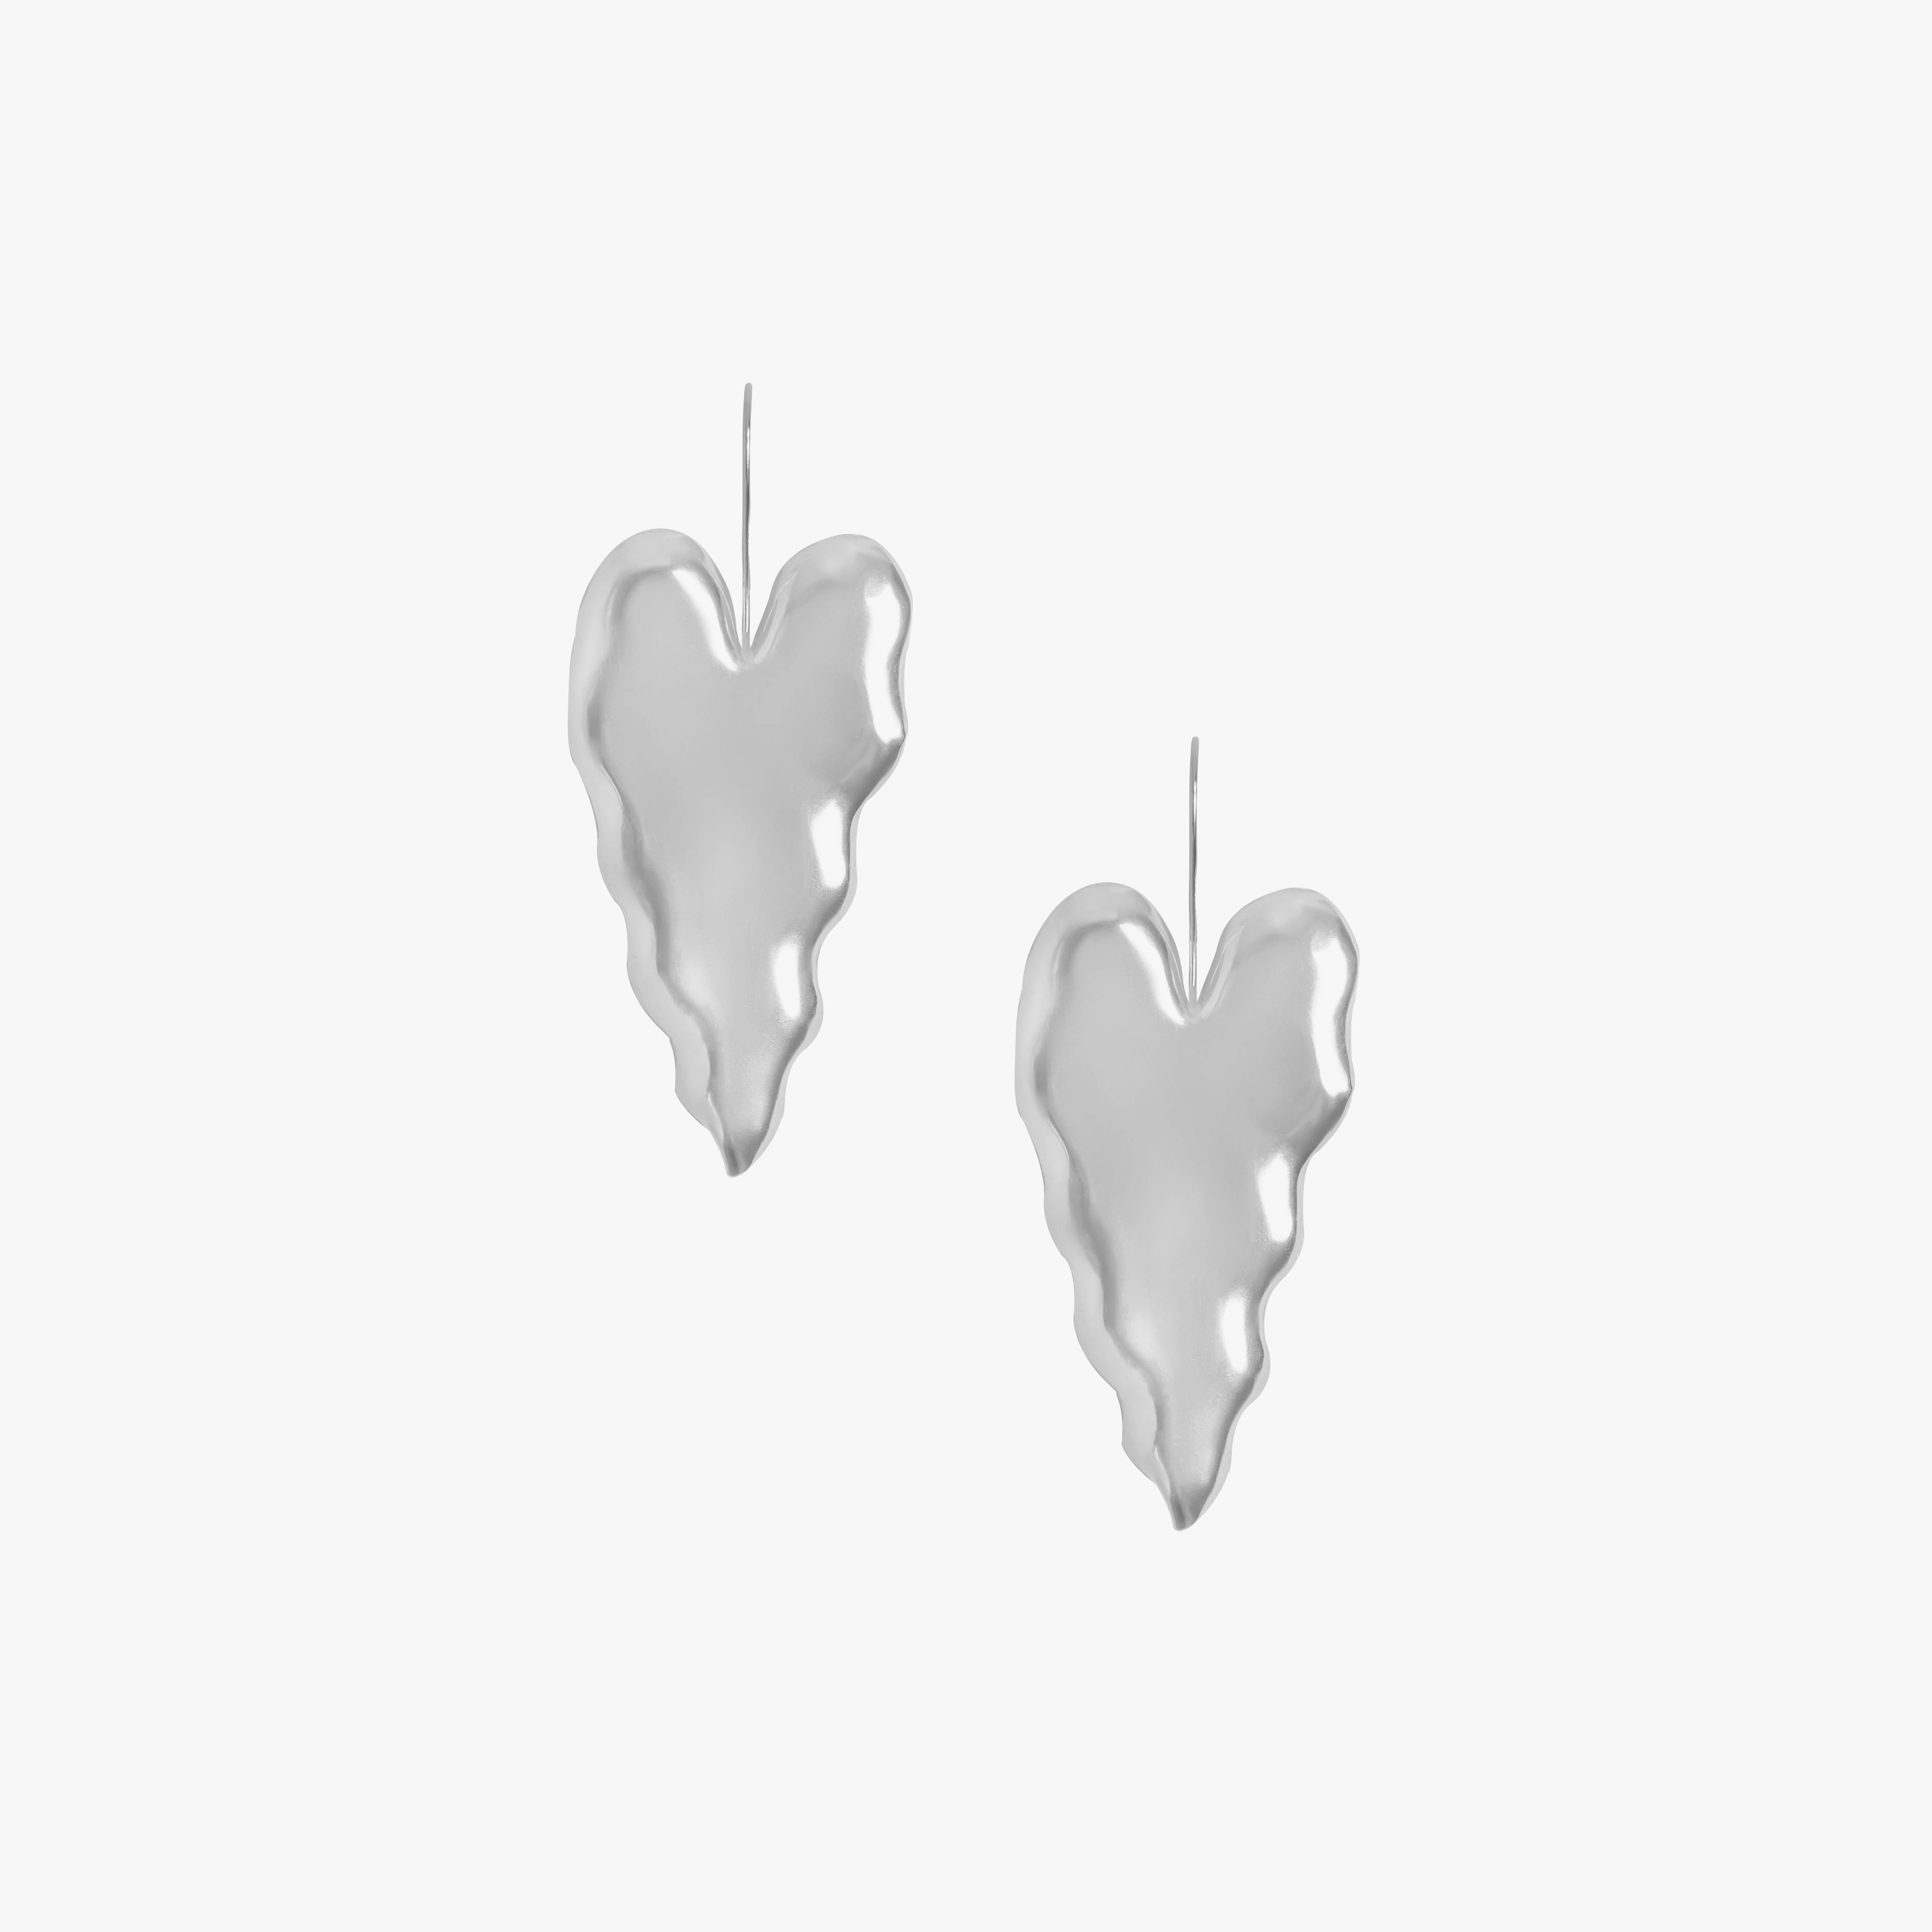 ANTHURIUM DANGLERS SILVER TONE , a product by Equiivalence